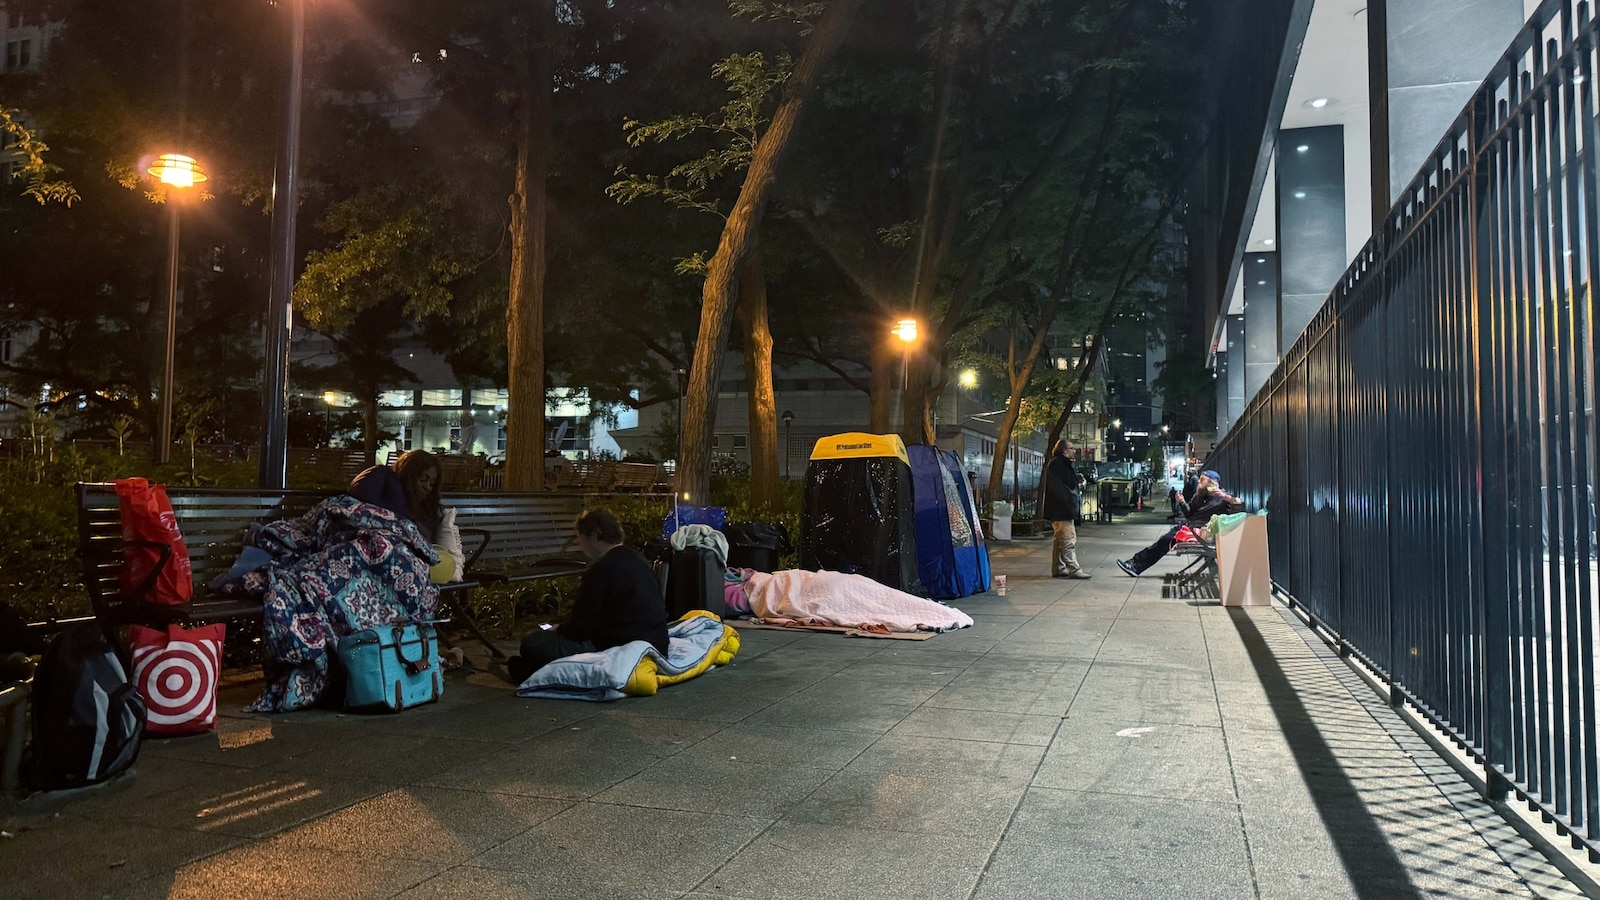 Meet some of the New Yorkers waiting overnight to get a seat at the Trump trial [Video]